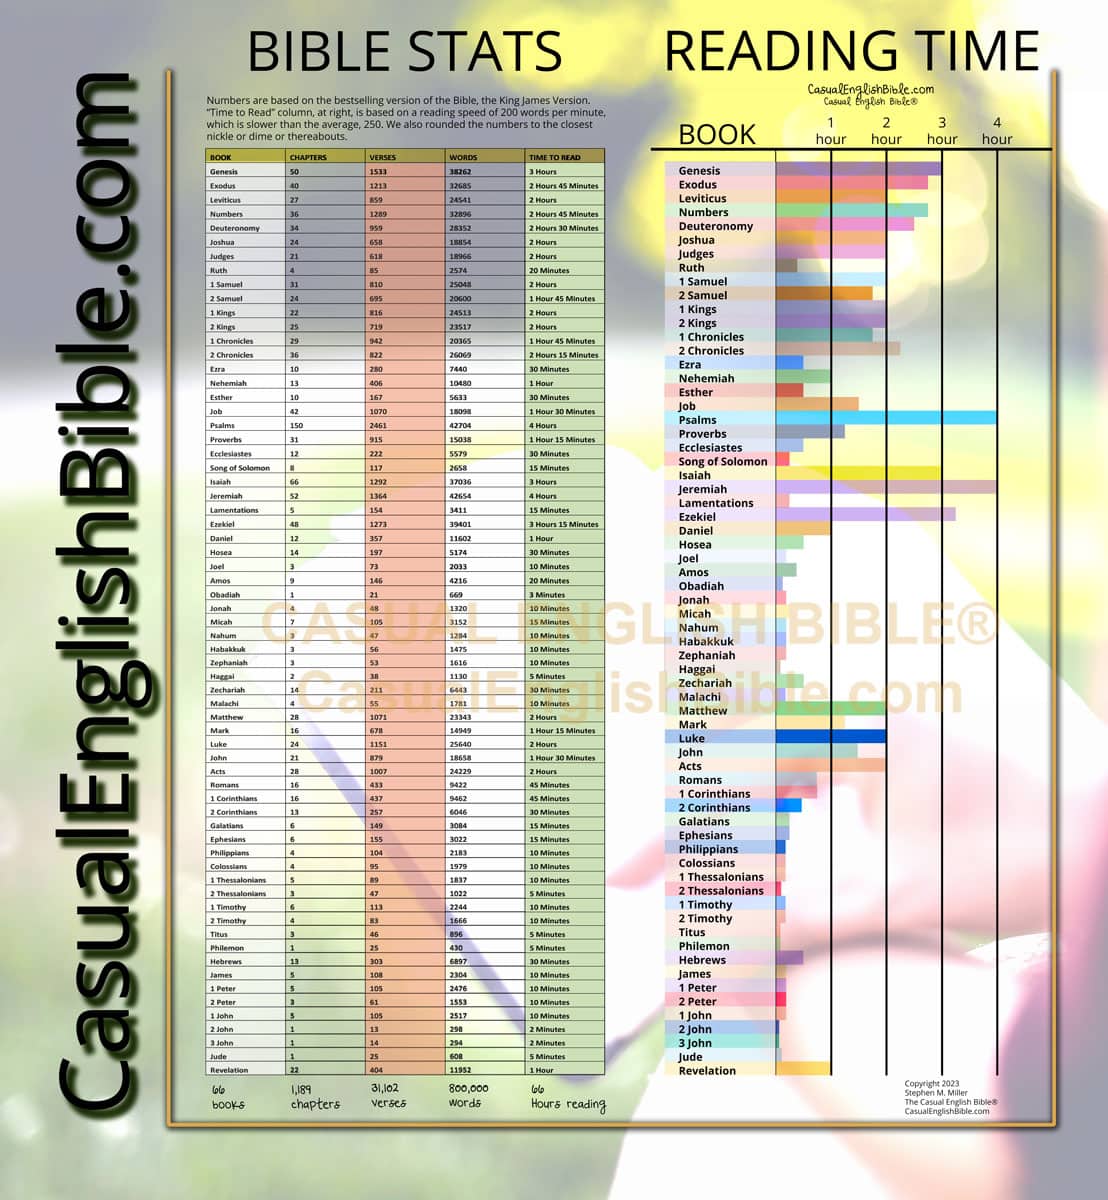 Bible statistics and reading time for each book